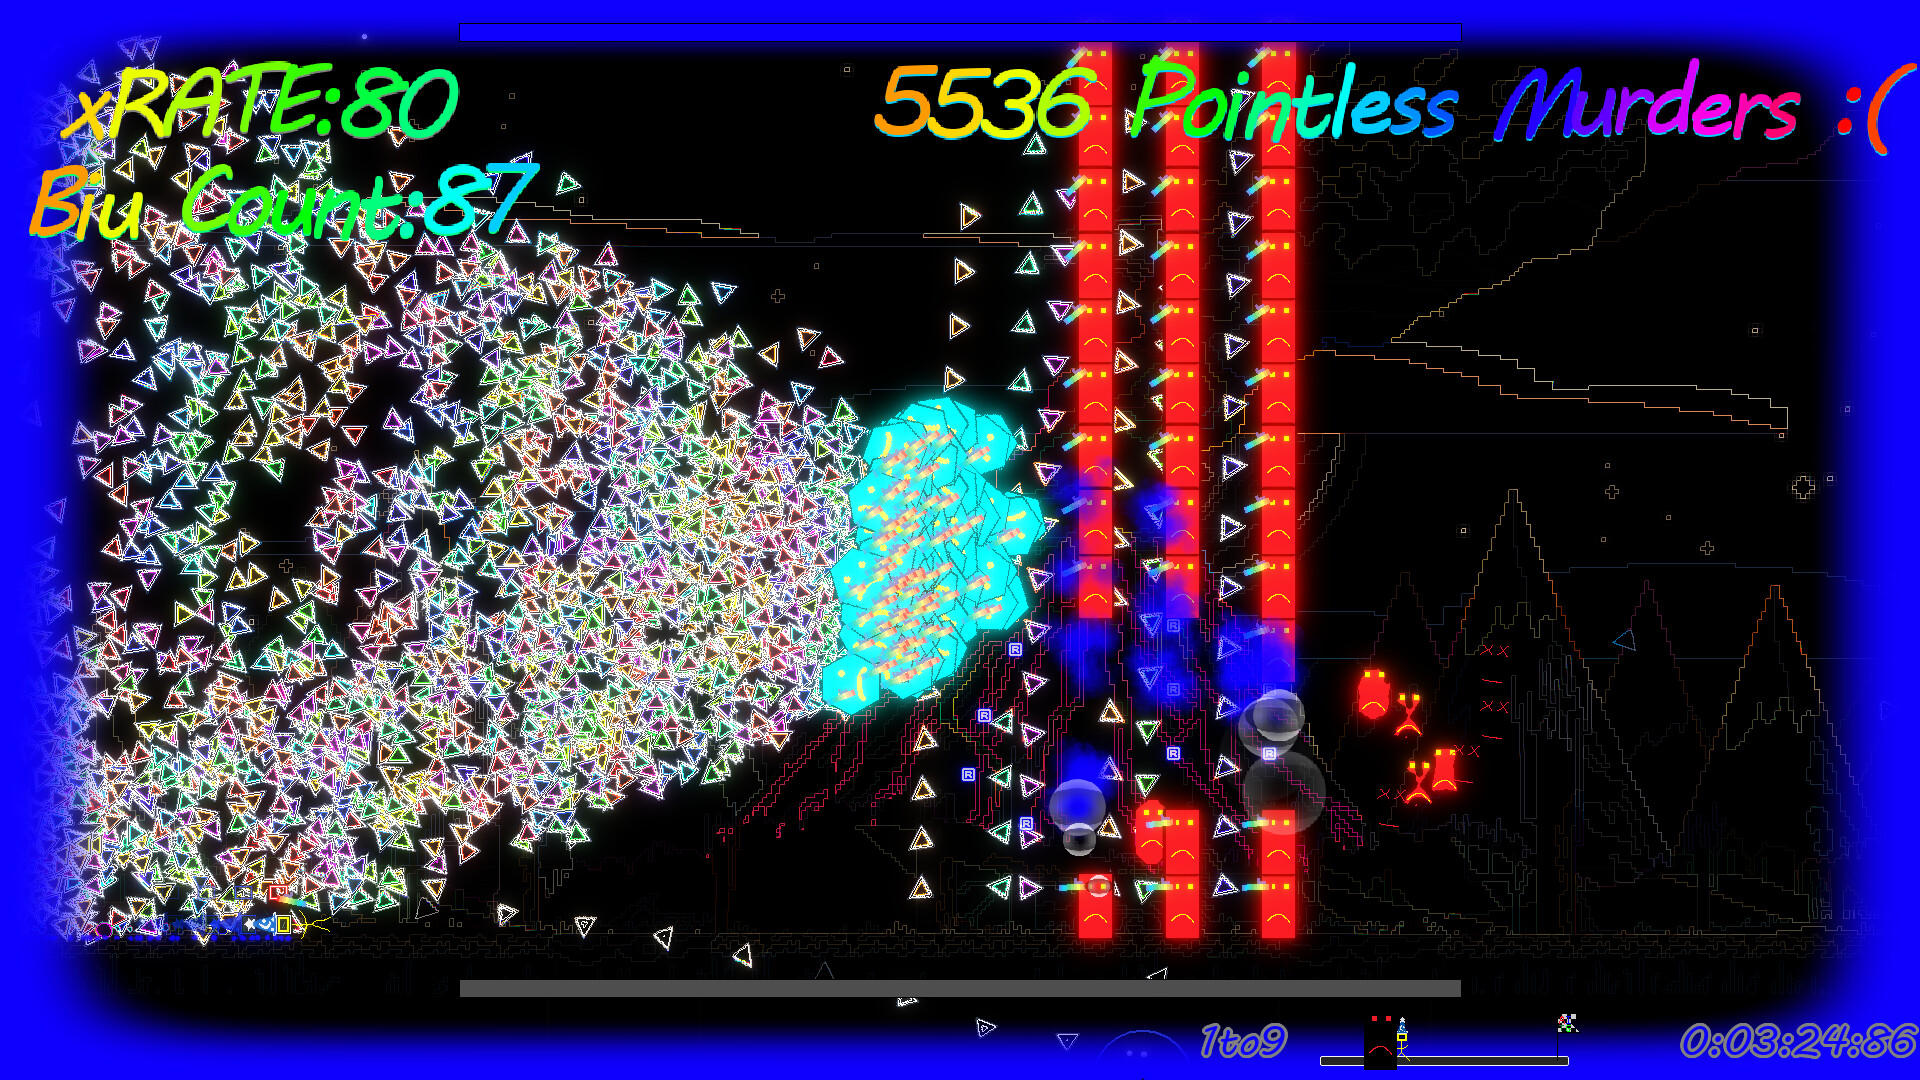 Screenshot of A2C:Ayry seems to be playtesting a 2D runner shooter from Cci